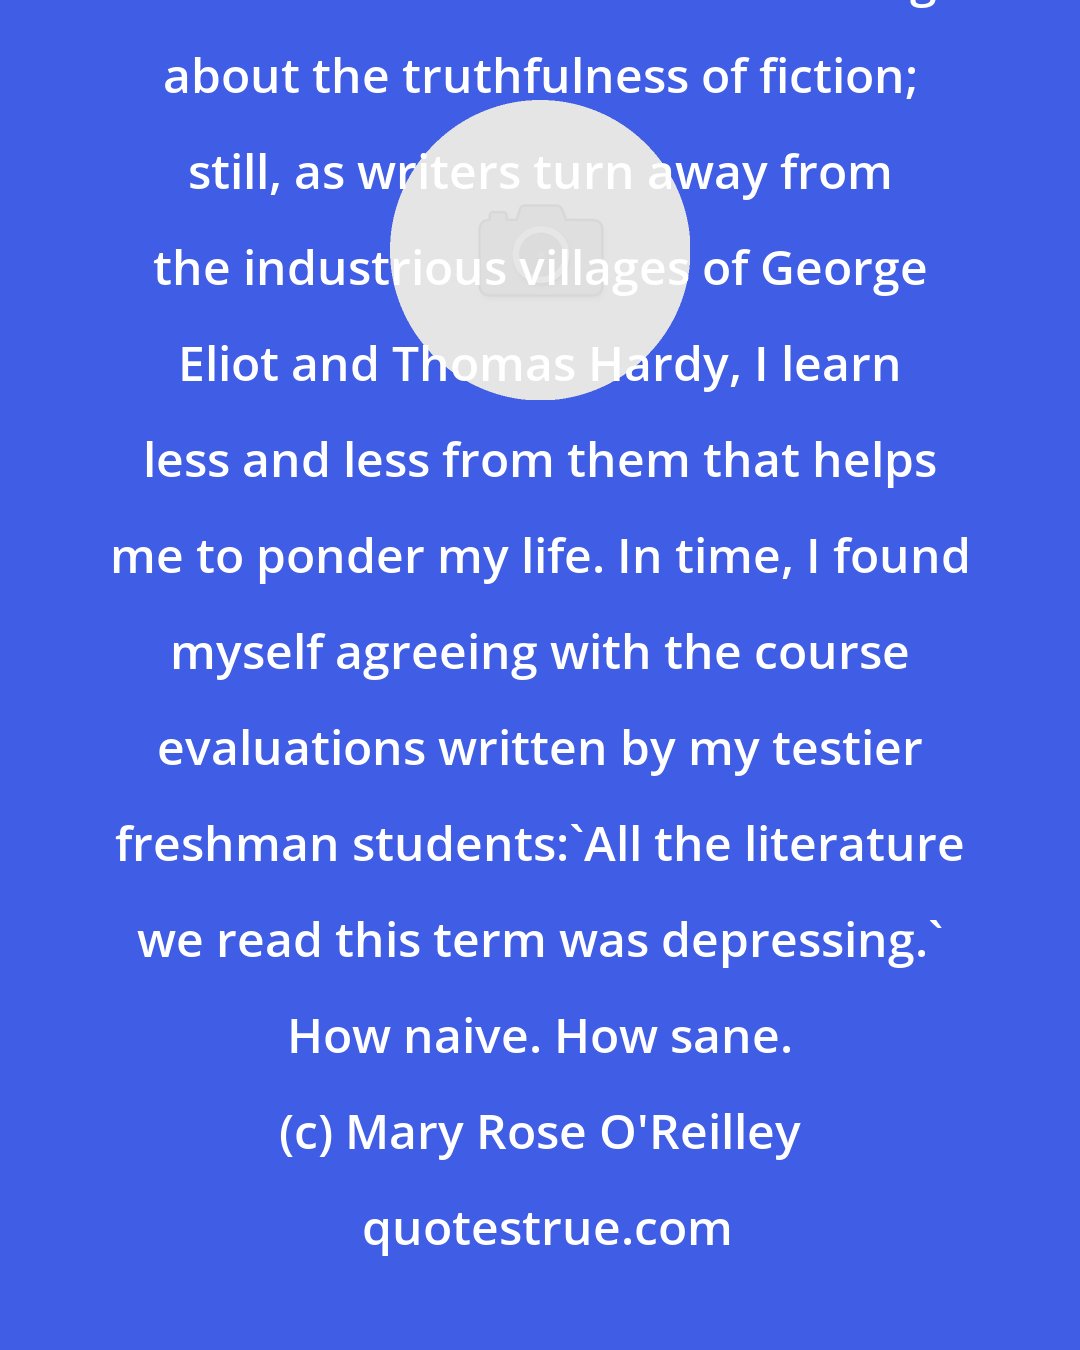 Mary Rose O'Reilley: I would not have majored in English and gone on to teach literature had I not been able to construct a counterargument about the truthfulness of fiction; still, as writers turn away from the industrious villages of George Eliot and Thomas Hardy, I learn less and less from them that helps me to ponder my life. In time, I found myself agreeing with the course evaluations written by my testier freshman students:'All the literature we read this term was depressing.' How naive. How sane.